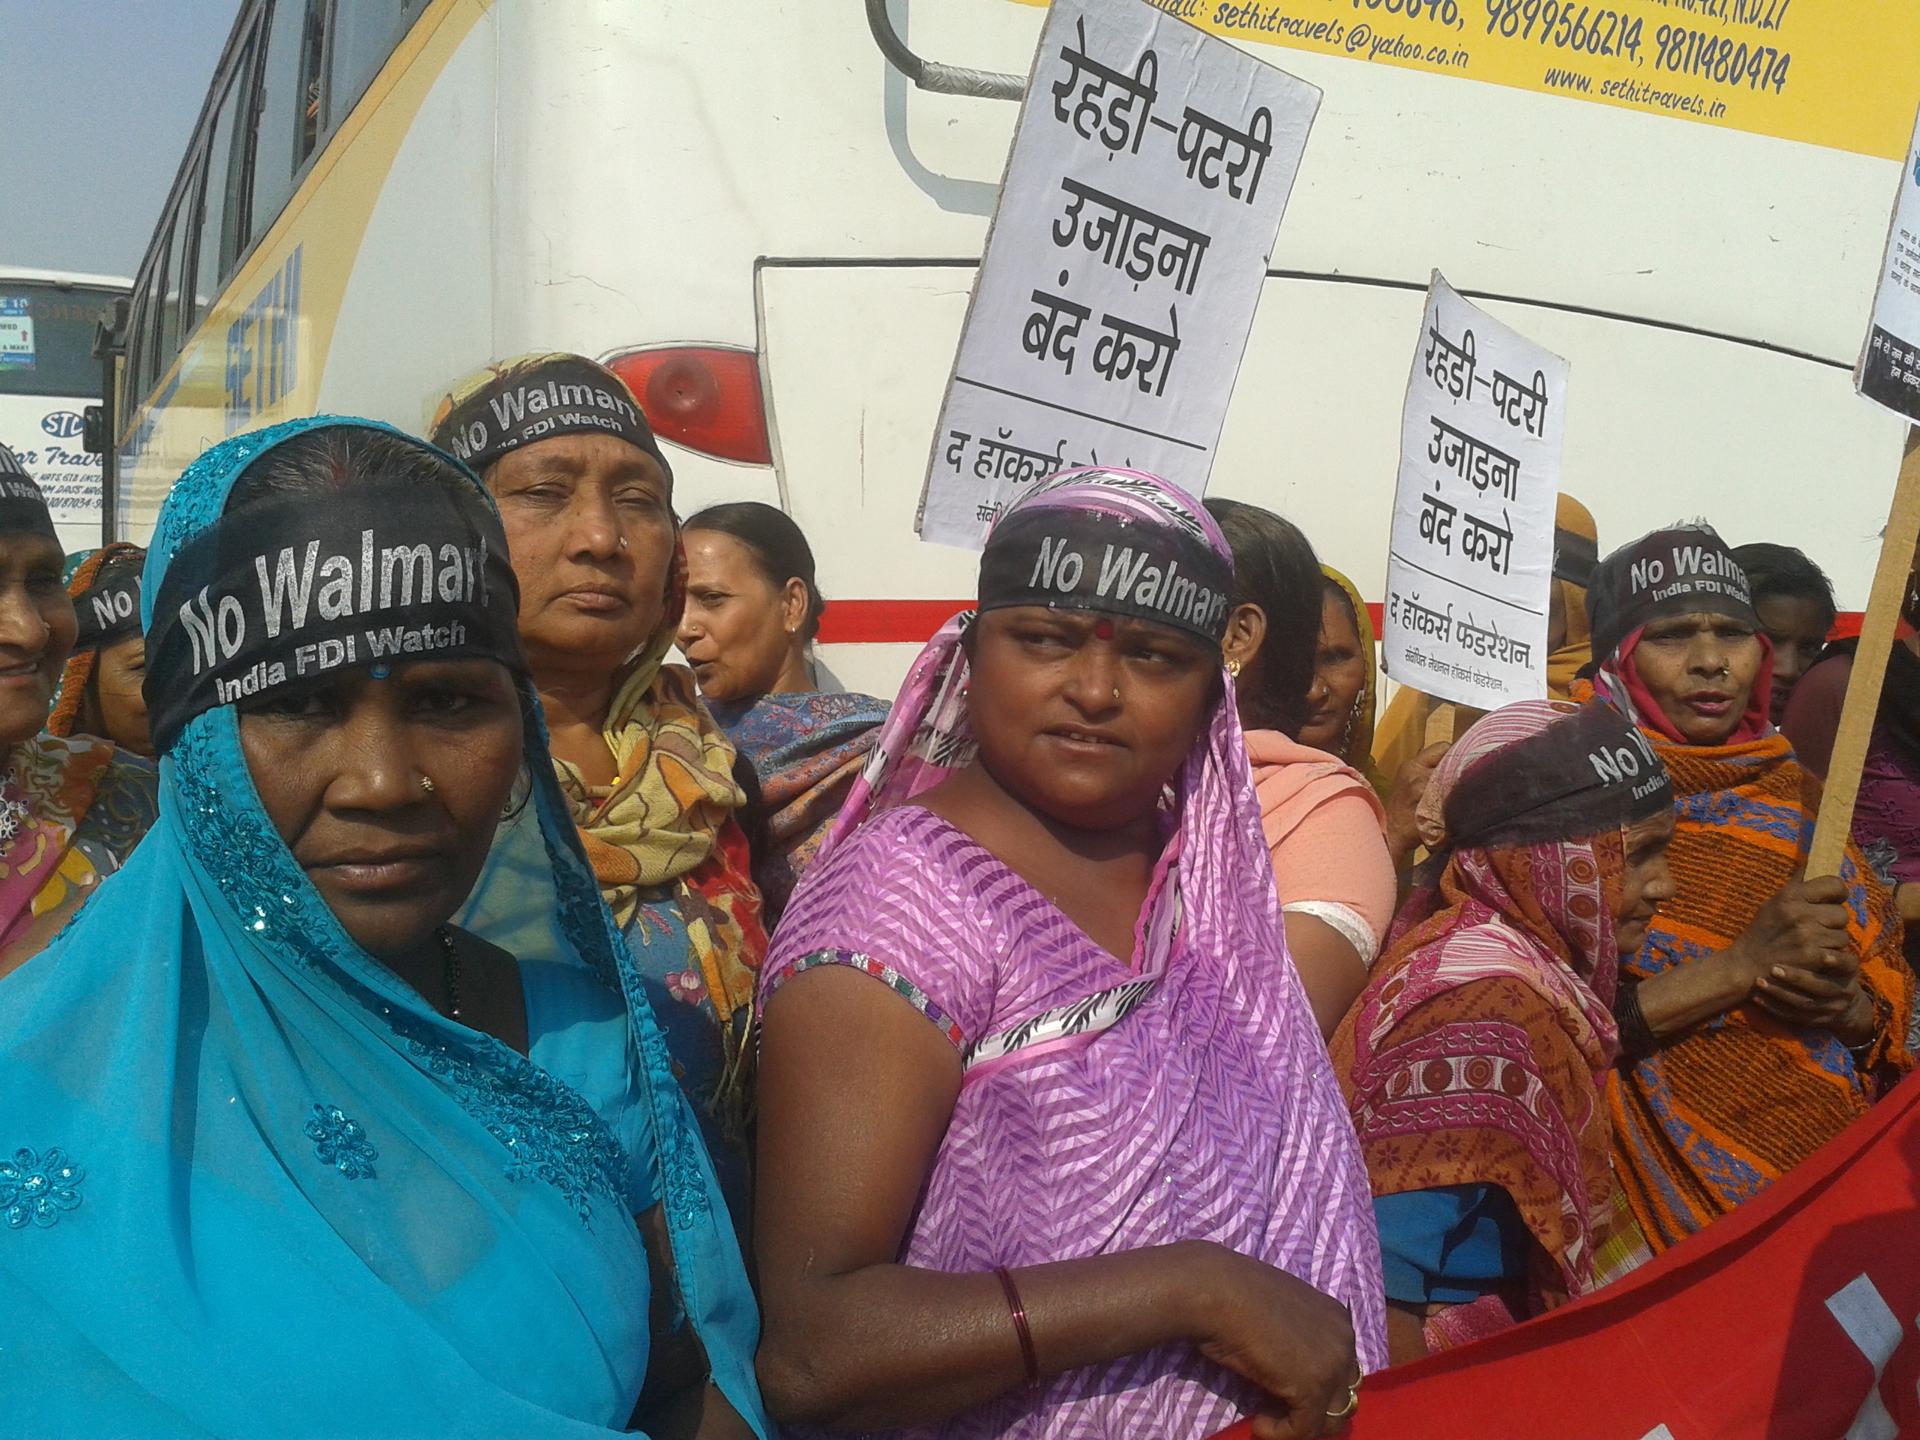 Women wearing "No Walmart" head bands at a protest outside Walmart India offices in Gurgaon, India.